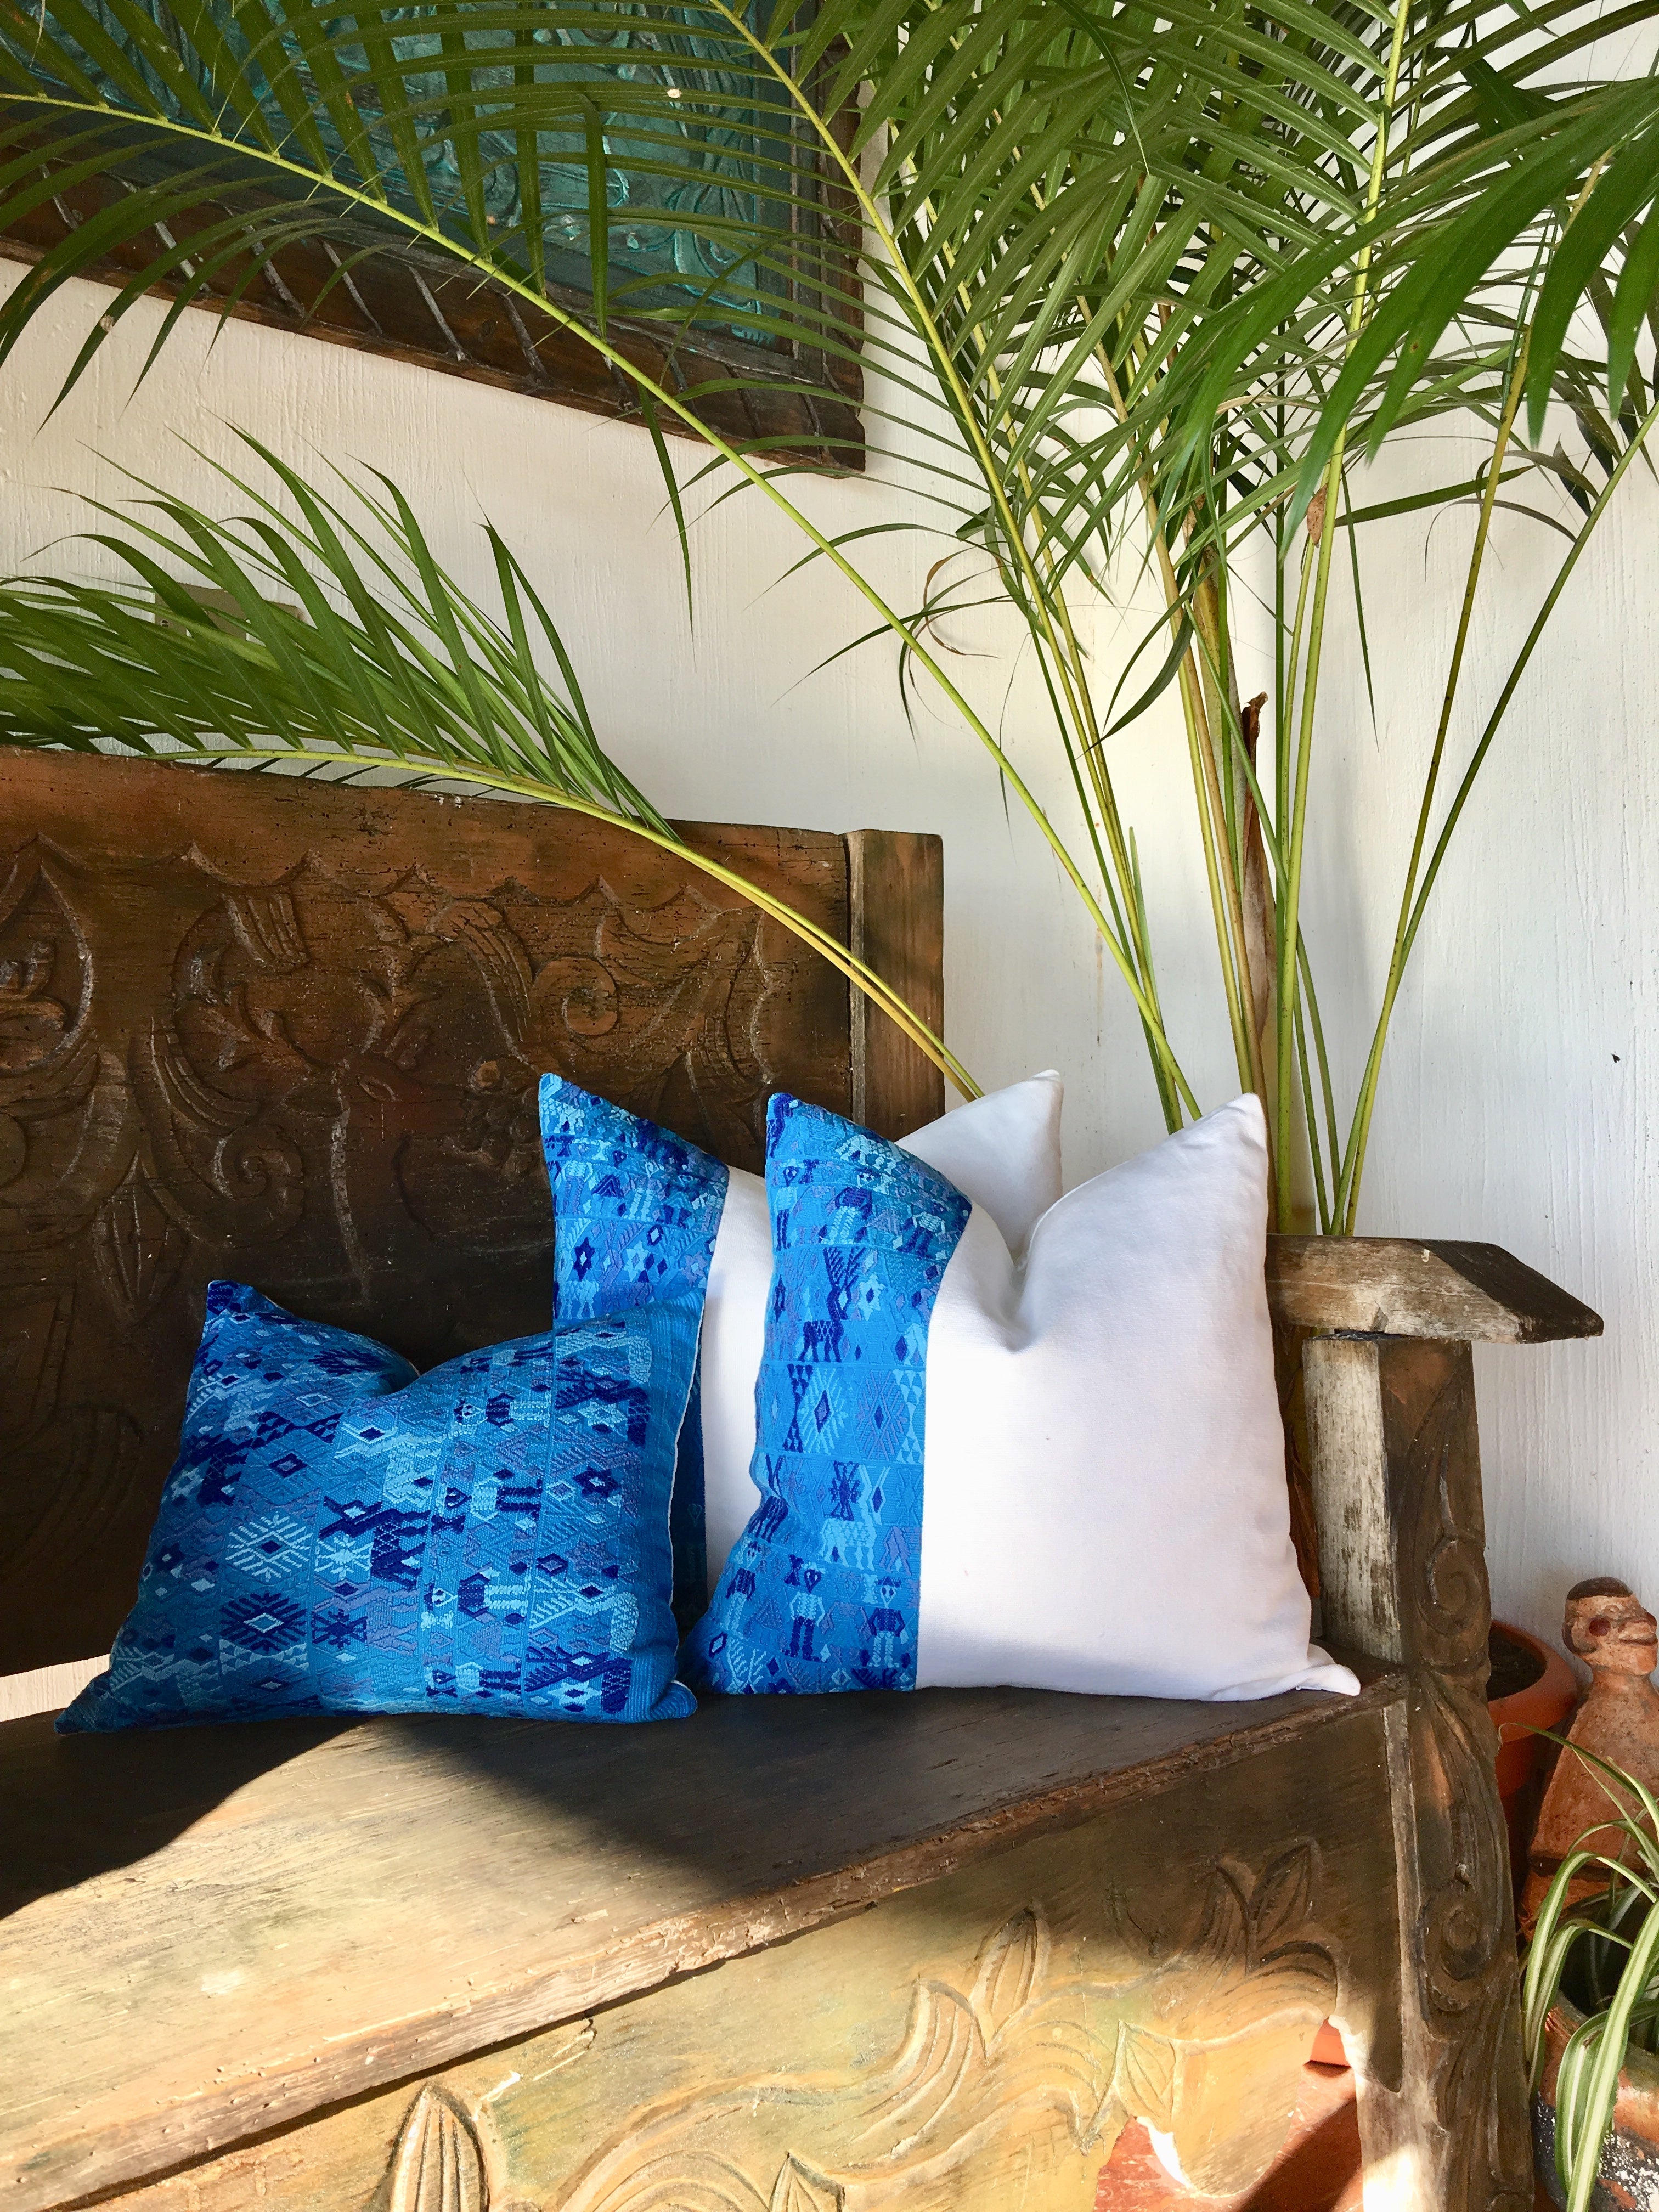 Guatemalan Huipil Pillow, vintage, hand woven blue and white throw cushion from Coban